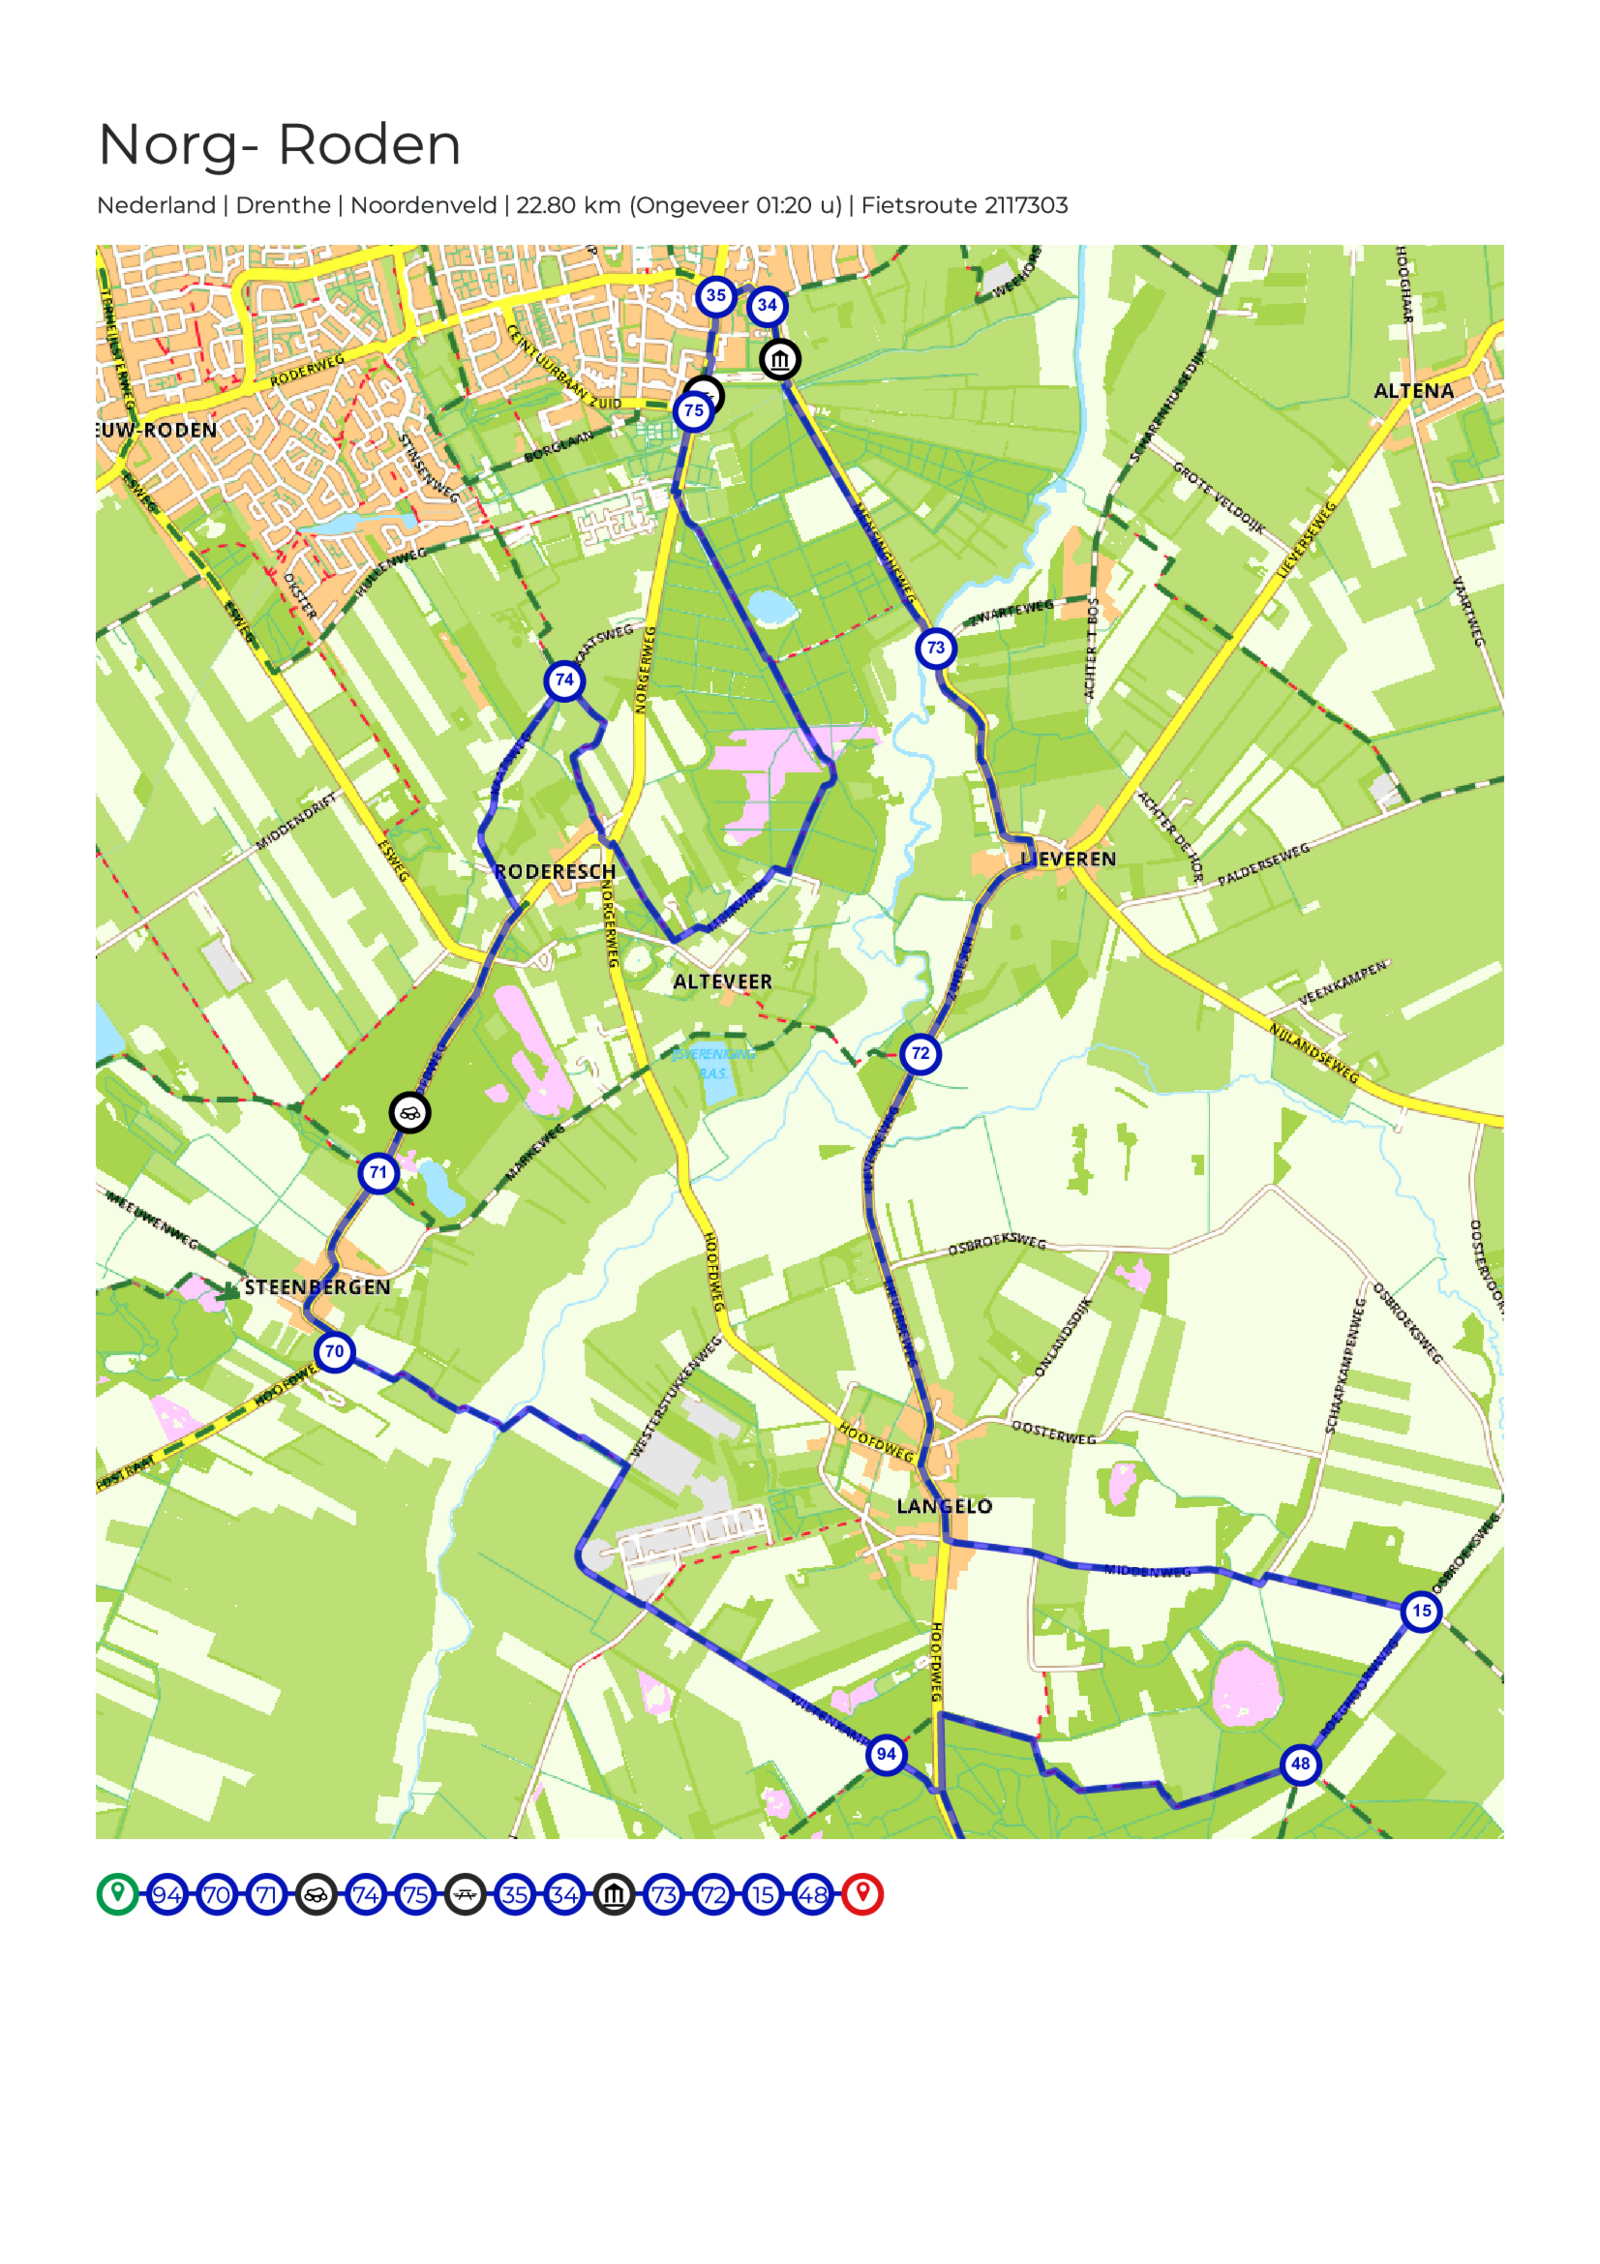 Fietsroute Norg - Roden